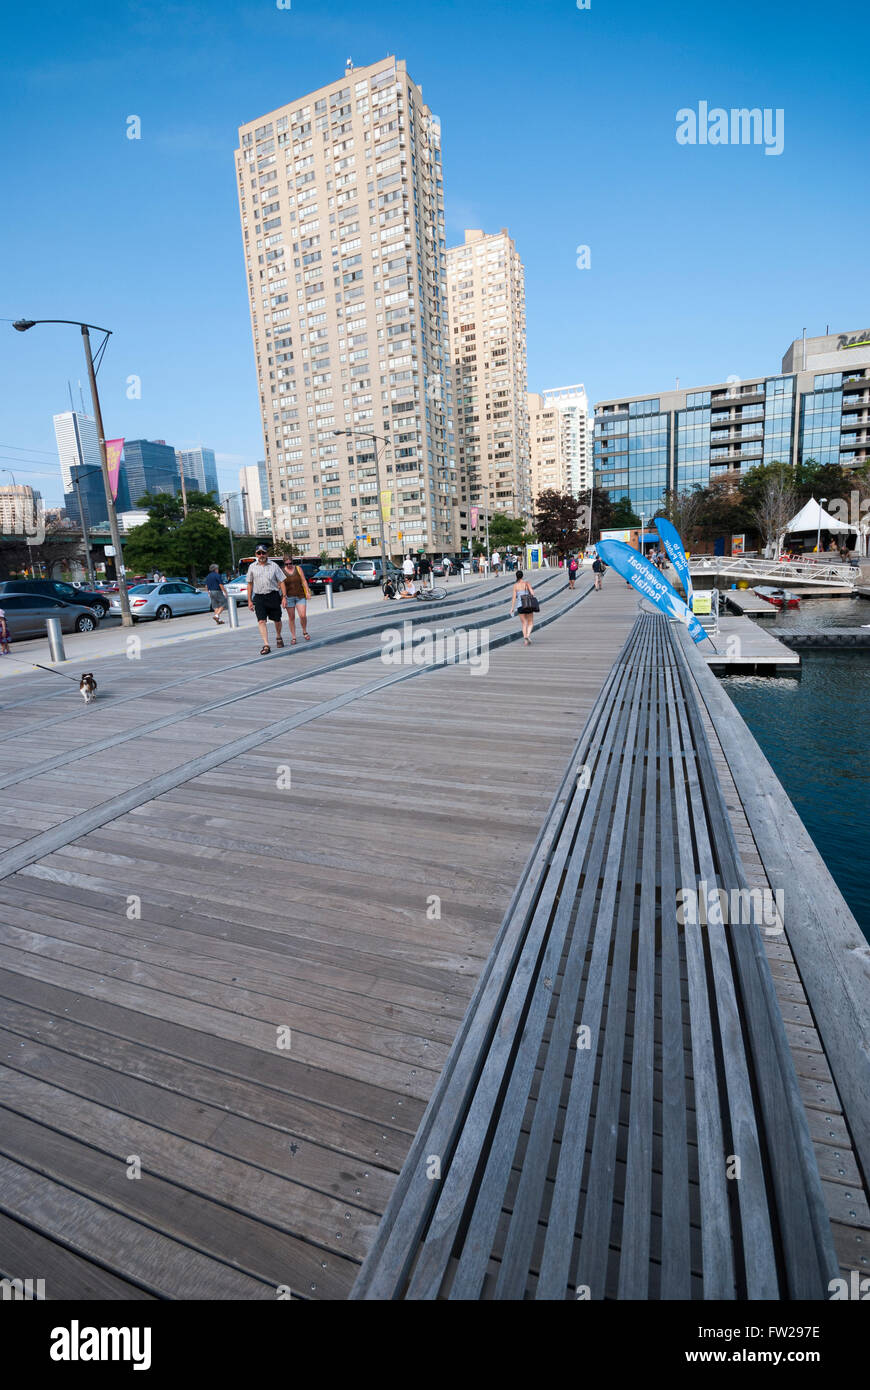 The Simcoe wave deck is an urban art project in Toronto's Harbourfront meant to emulate the wave movement of Lake Ontario Stock Photo